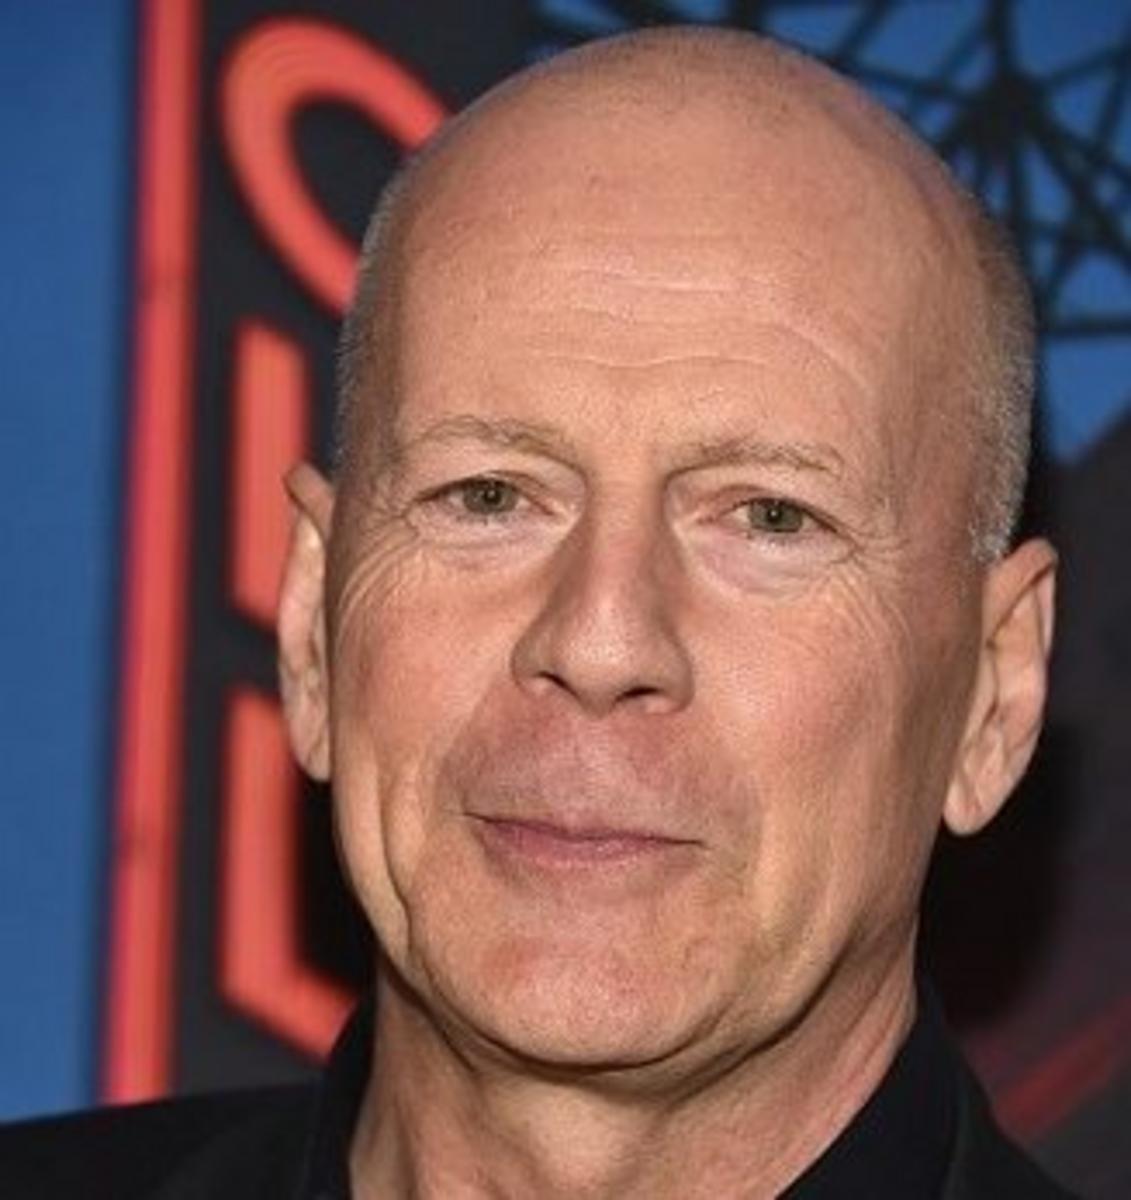 Bruce Willis Net Worth Celebrity Net Worth Well, it won't be possible for us to accommodate all bruce willis movies at this point of time as the list of his movies is quite long. bruce willis net worth celebrity net